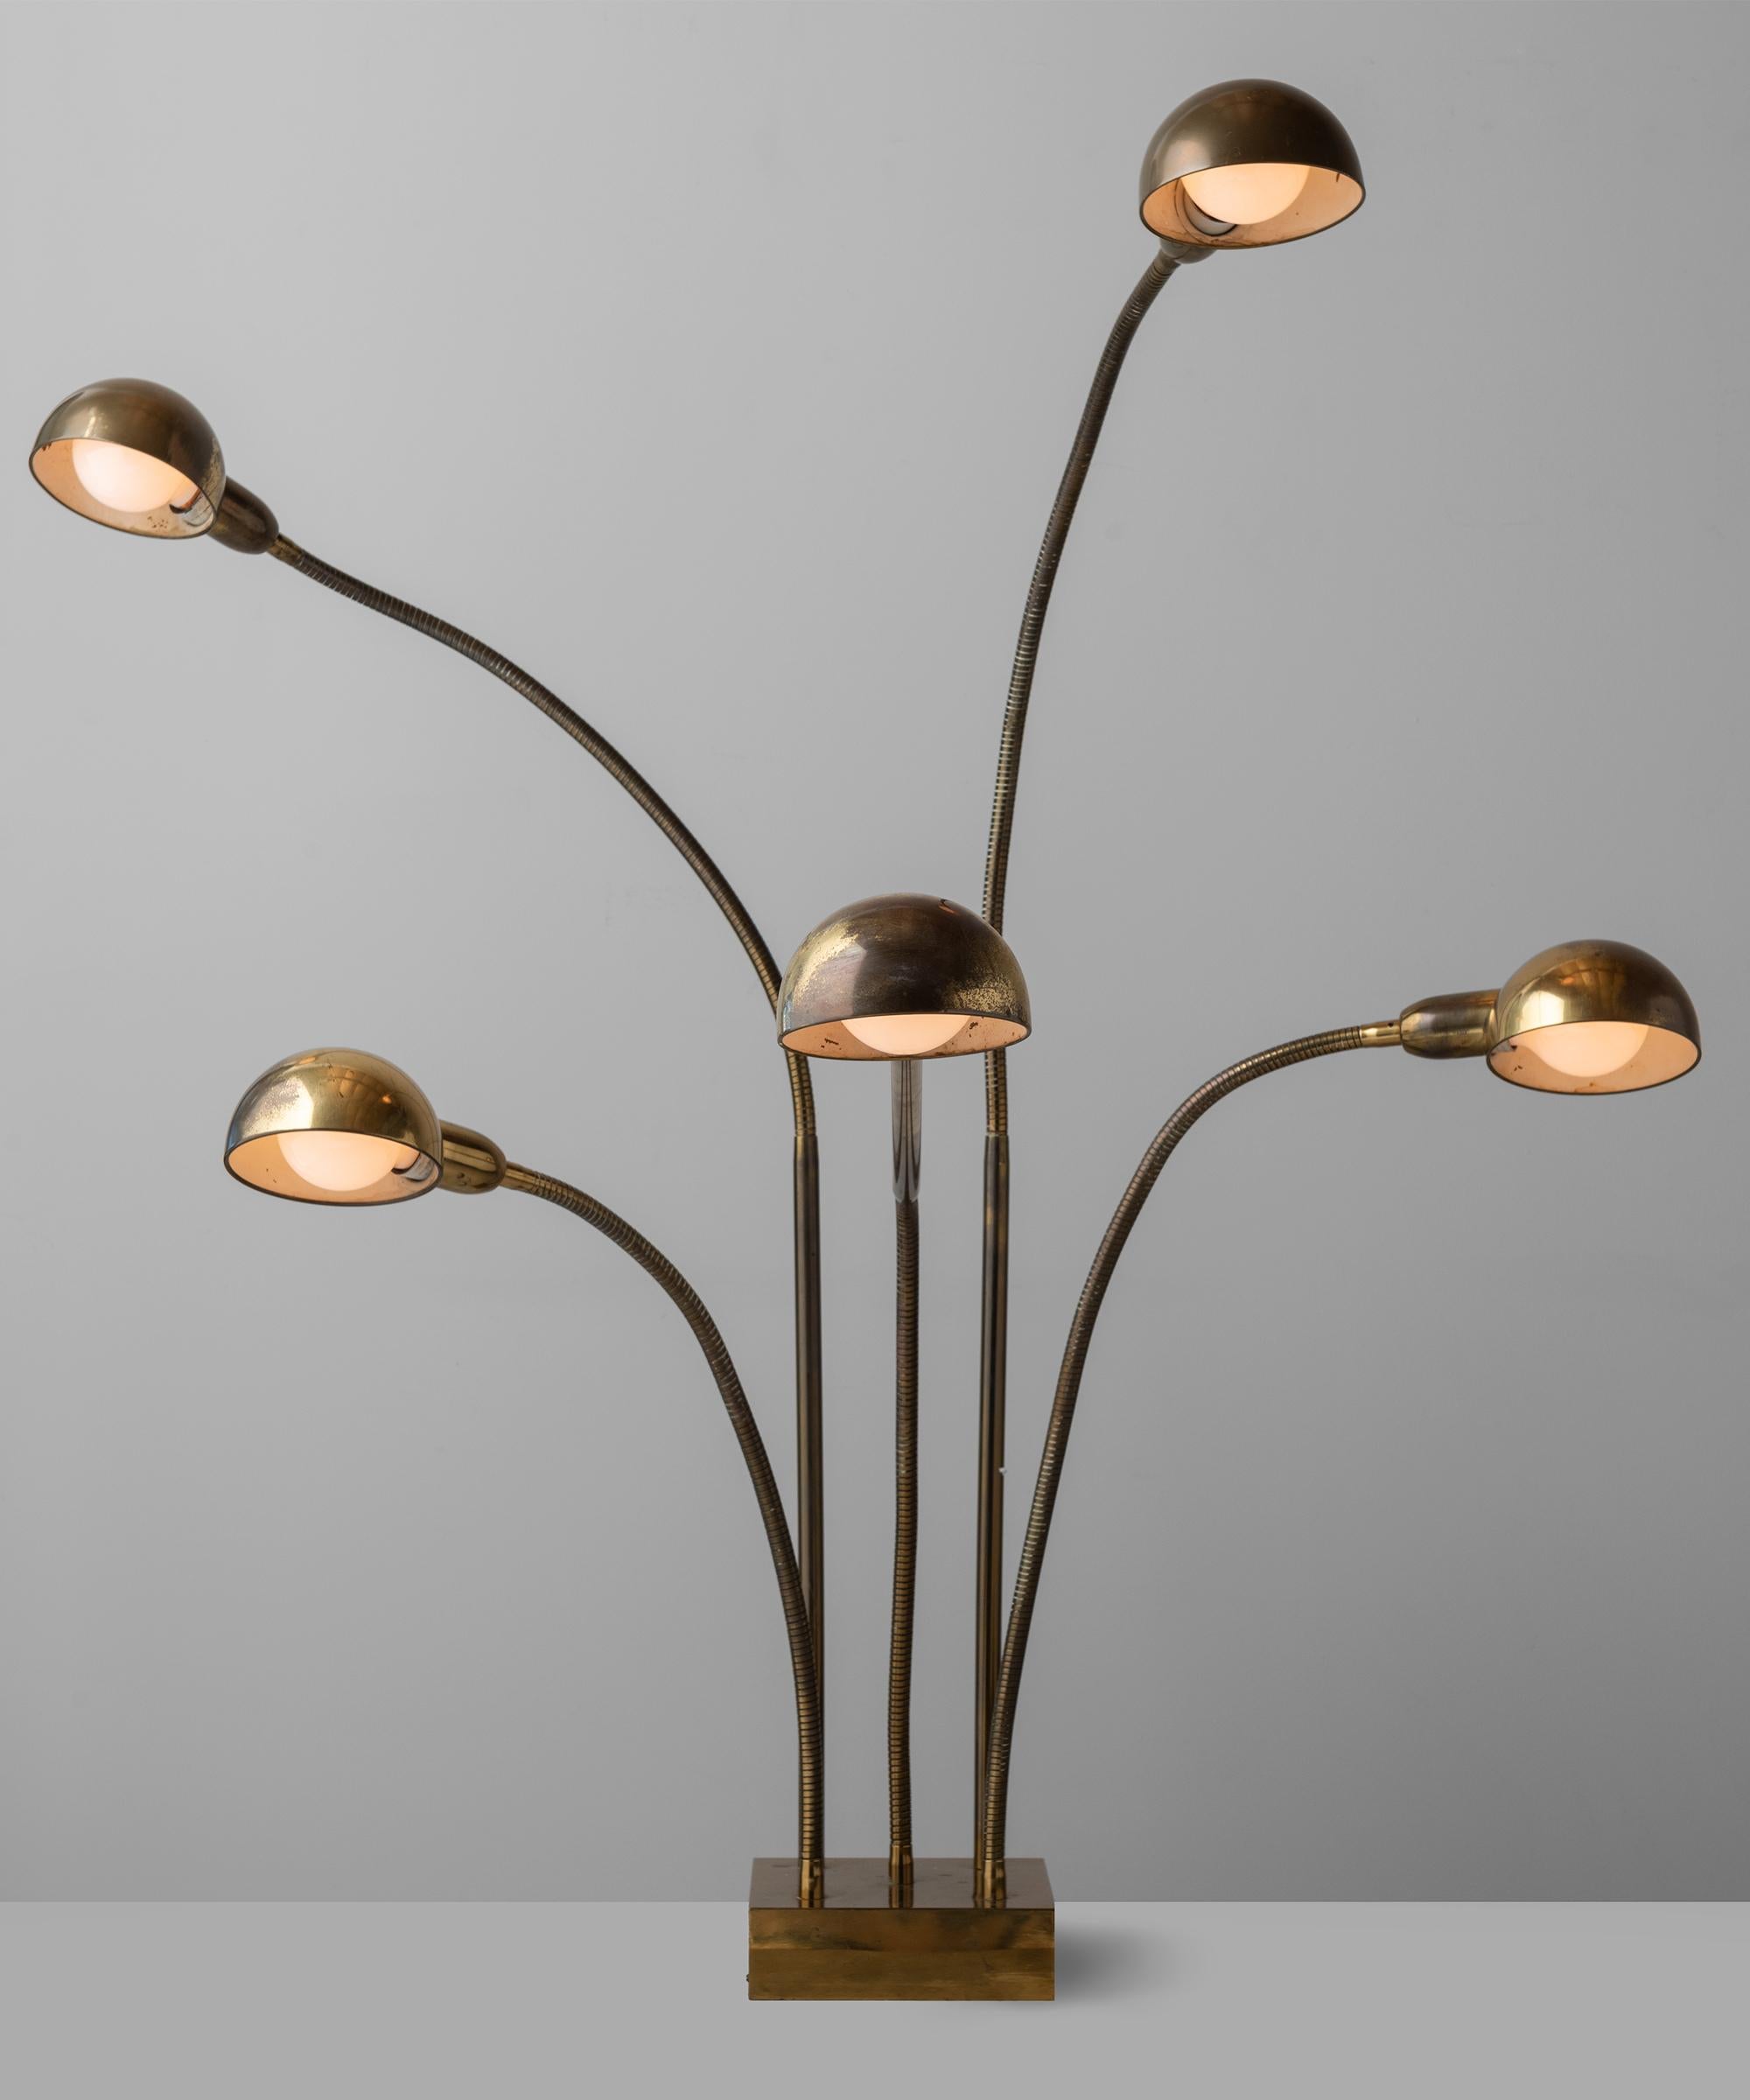 Hydra lamp by Pierre Folie, France circa 1970.

Works as a floor lamp or as a table lamp. Brass lamp with adjustable arms. 8